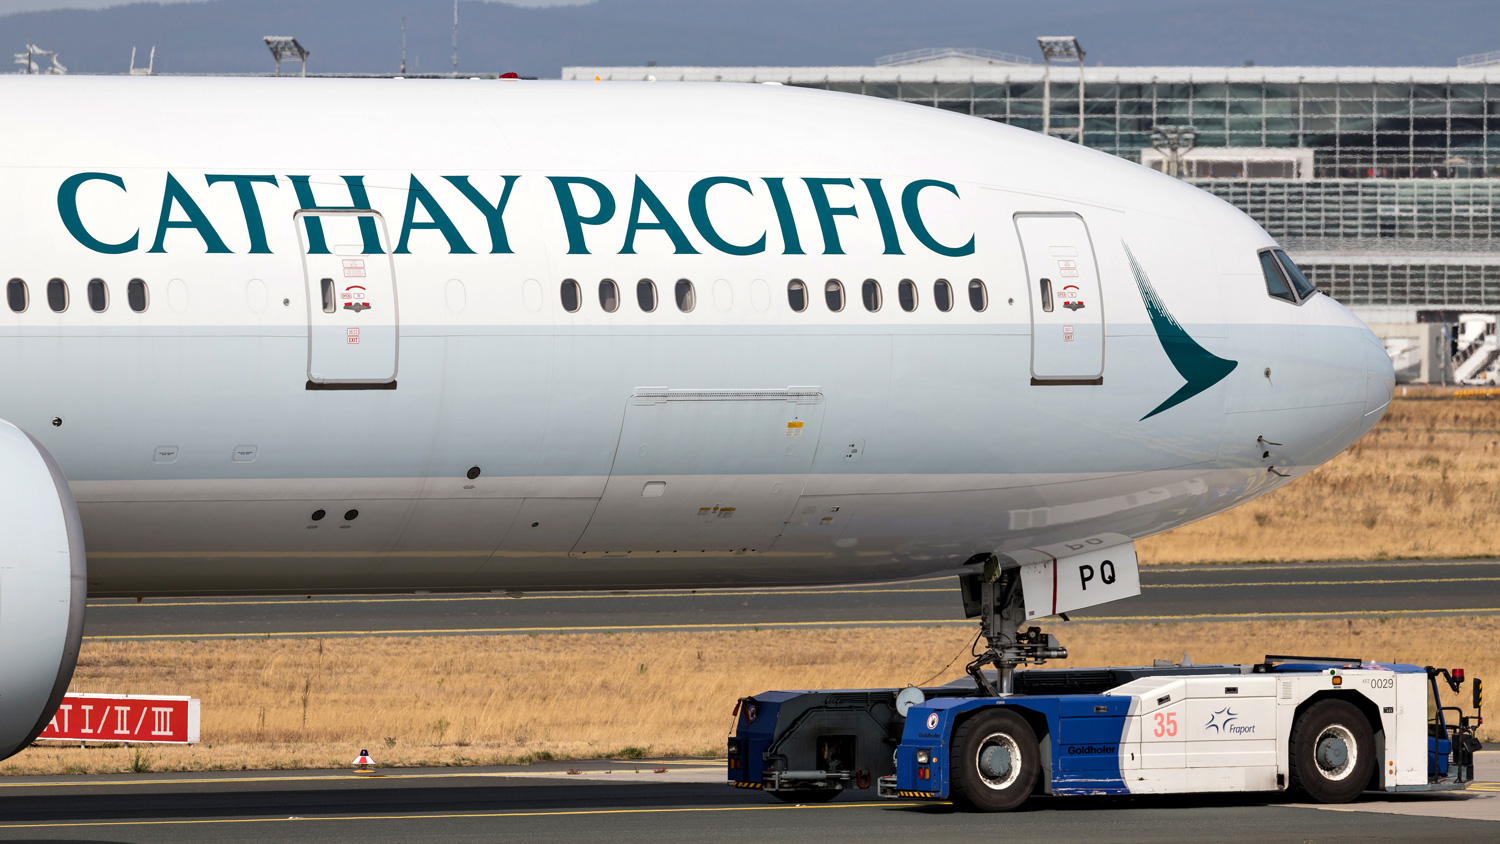 The front end of a Cathay Pacific airplane